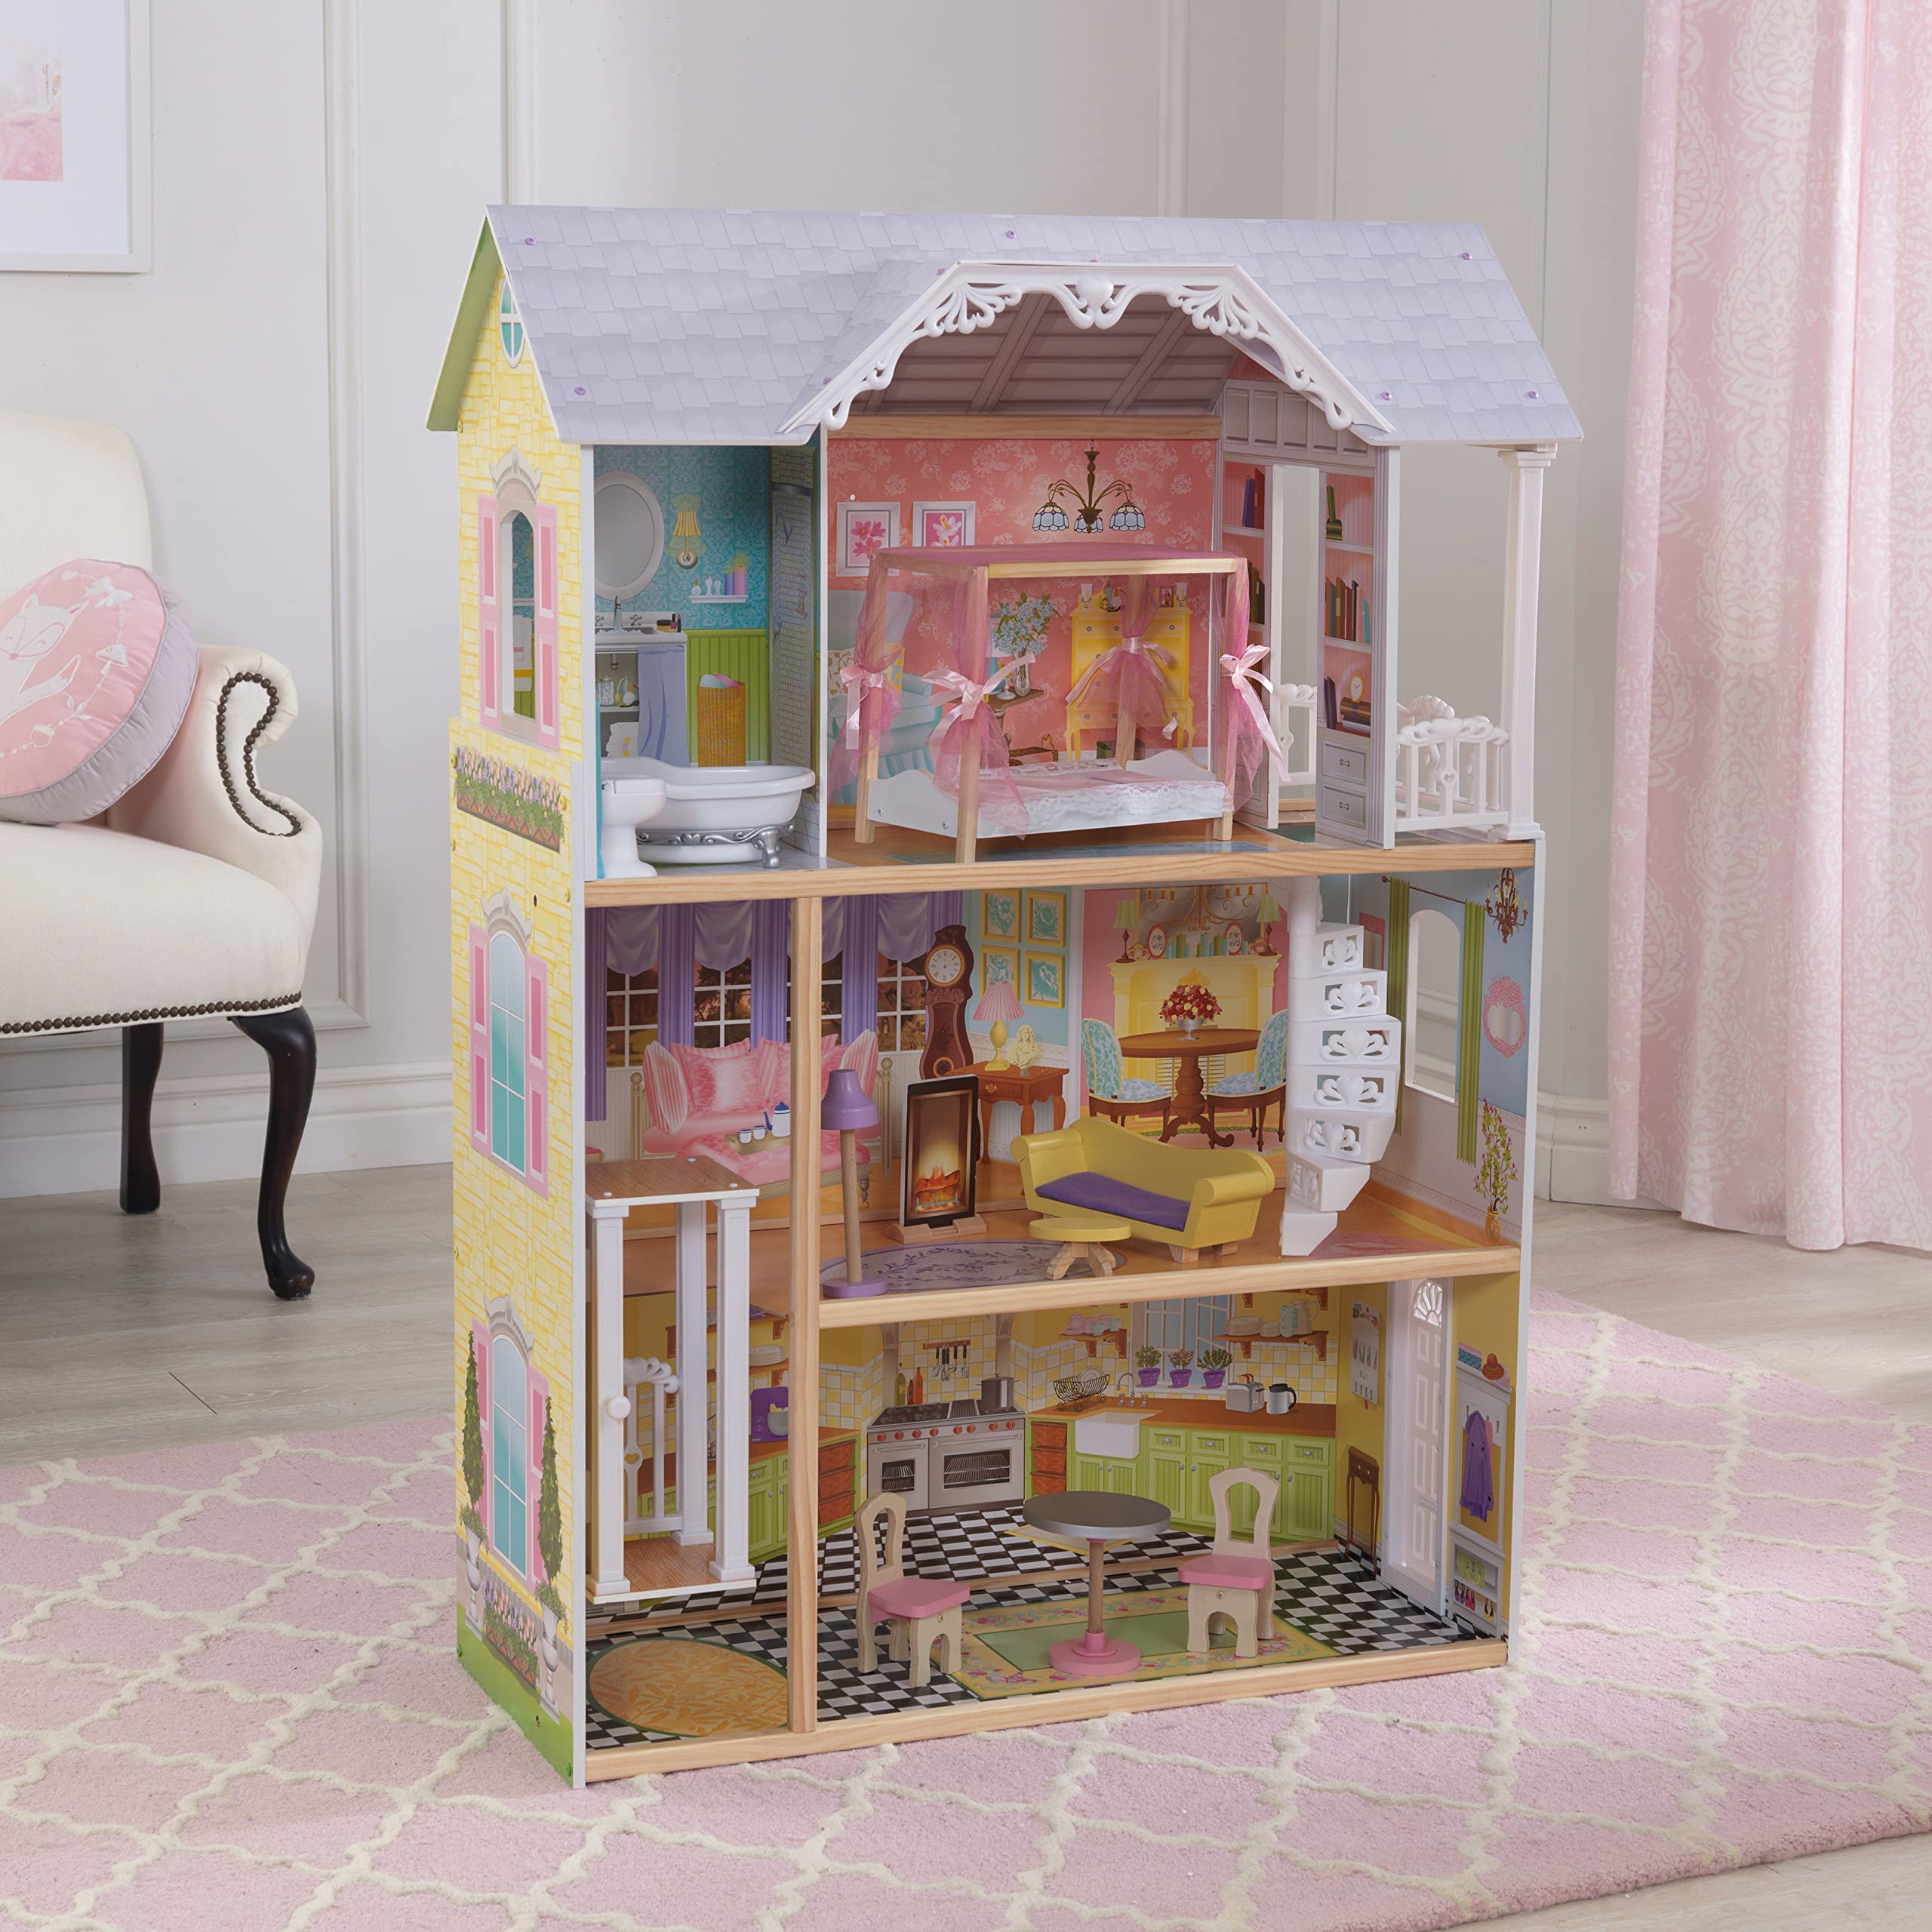 KidKraft Kaylee Wooden Dollhouse, Almost 4 Feet Tall with Elevator, Stairs and 10 Accessories, Gift for Ages 3+